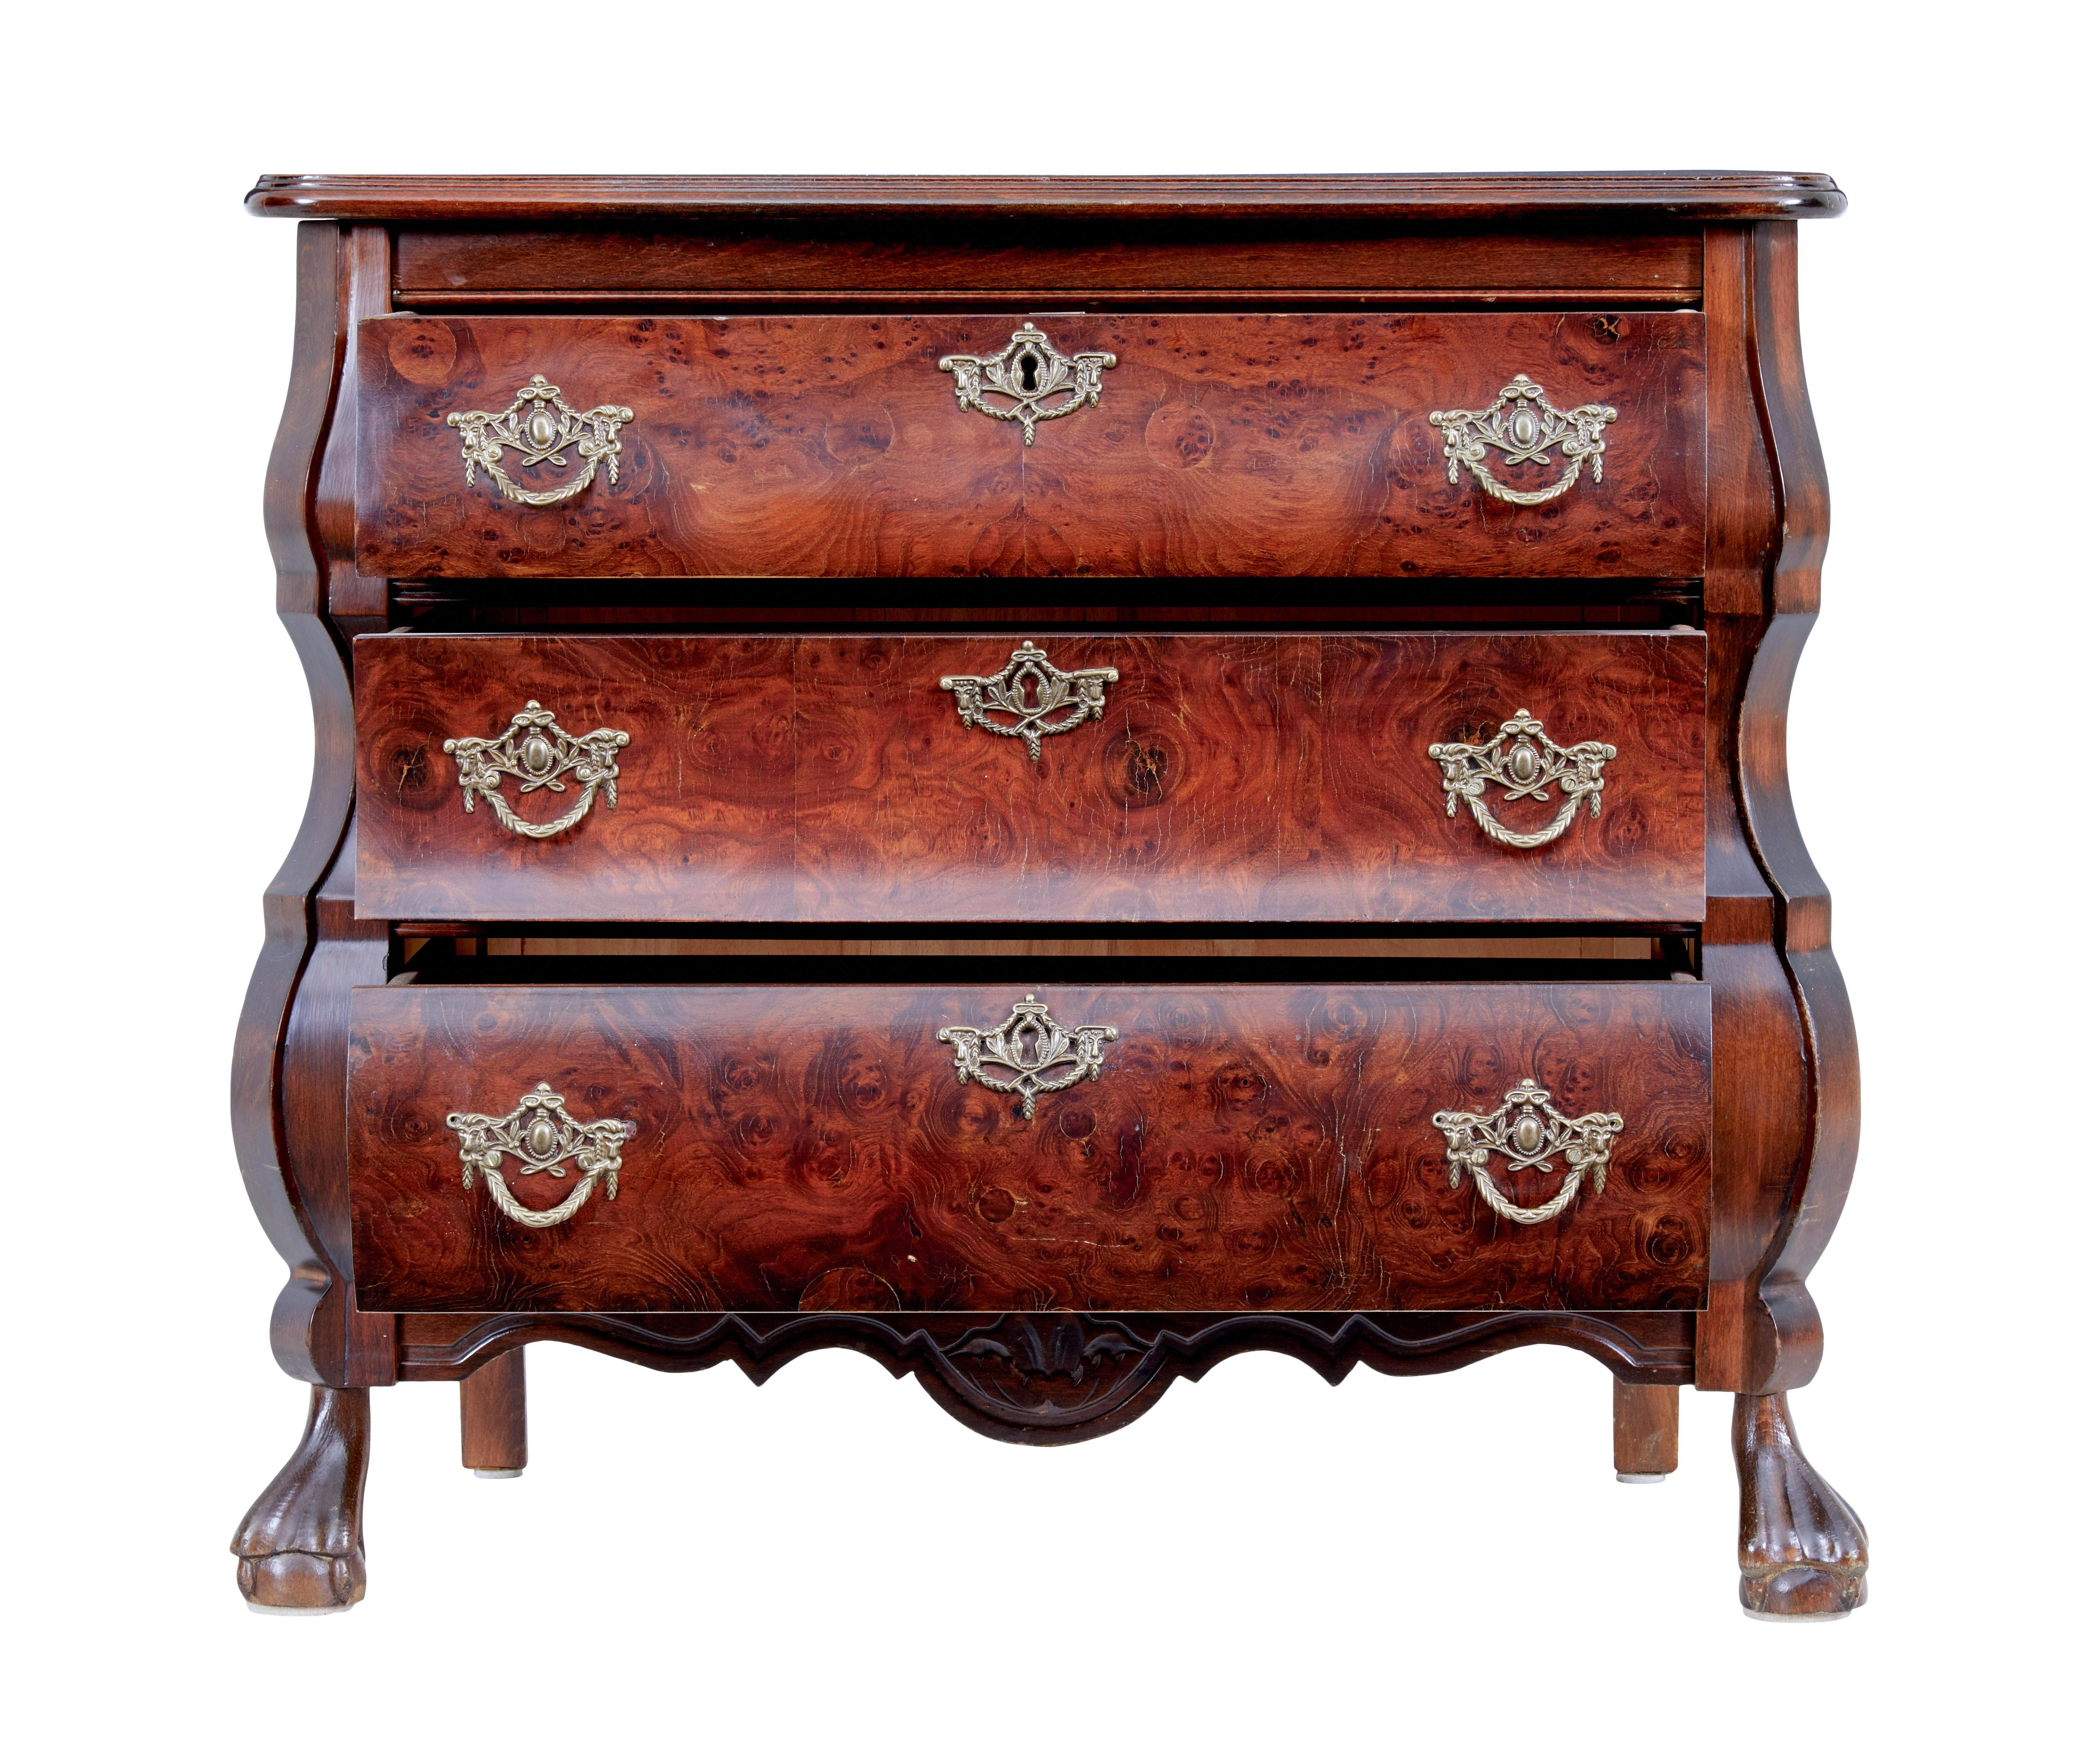 1950's small mulberry bombe shaped commode chest of drawers circa 1960.

Rococo revival chest of small proportions.

Petit scandinavian commode circa 1960. Made in beautiful mulberry veneers. 3 drawers with ornate brass swag handles and escutheons.